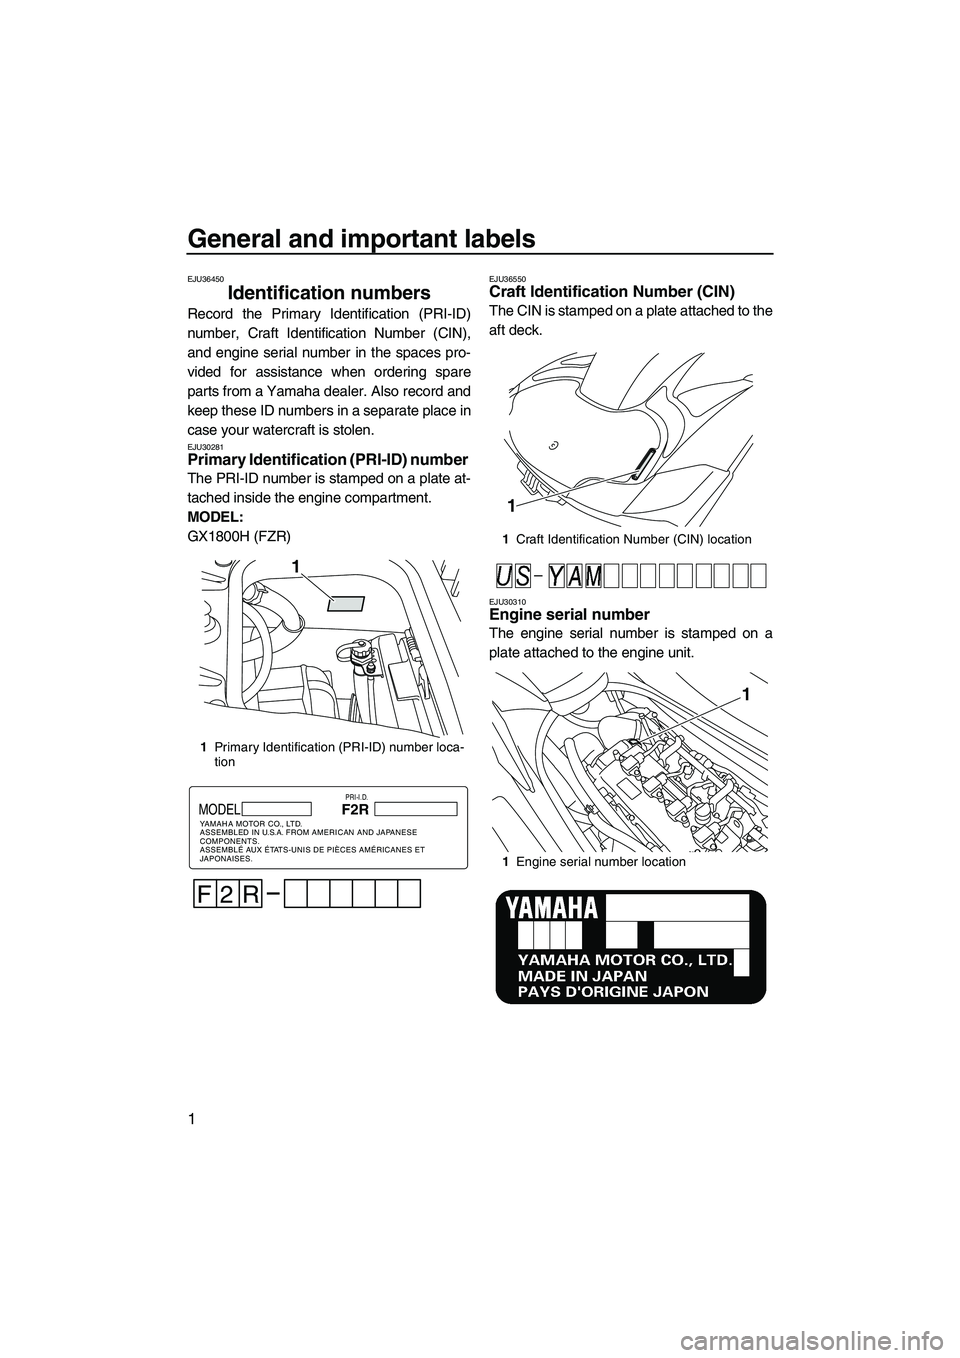 YAMAHA FZR 2009  Owners Manual General and important labels
1
EJU36450
Identification numbers 
Record the Primary Identification (PRI-ID)
number, Craft Identification Number (CIN),
and engine serial number in the spaces pro-
vided 